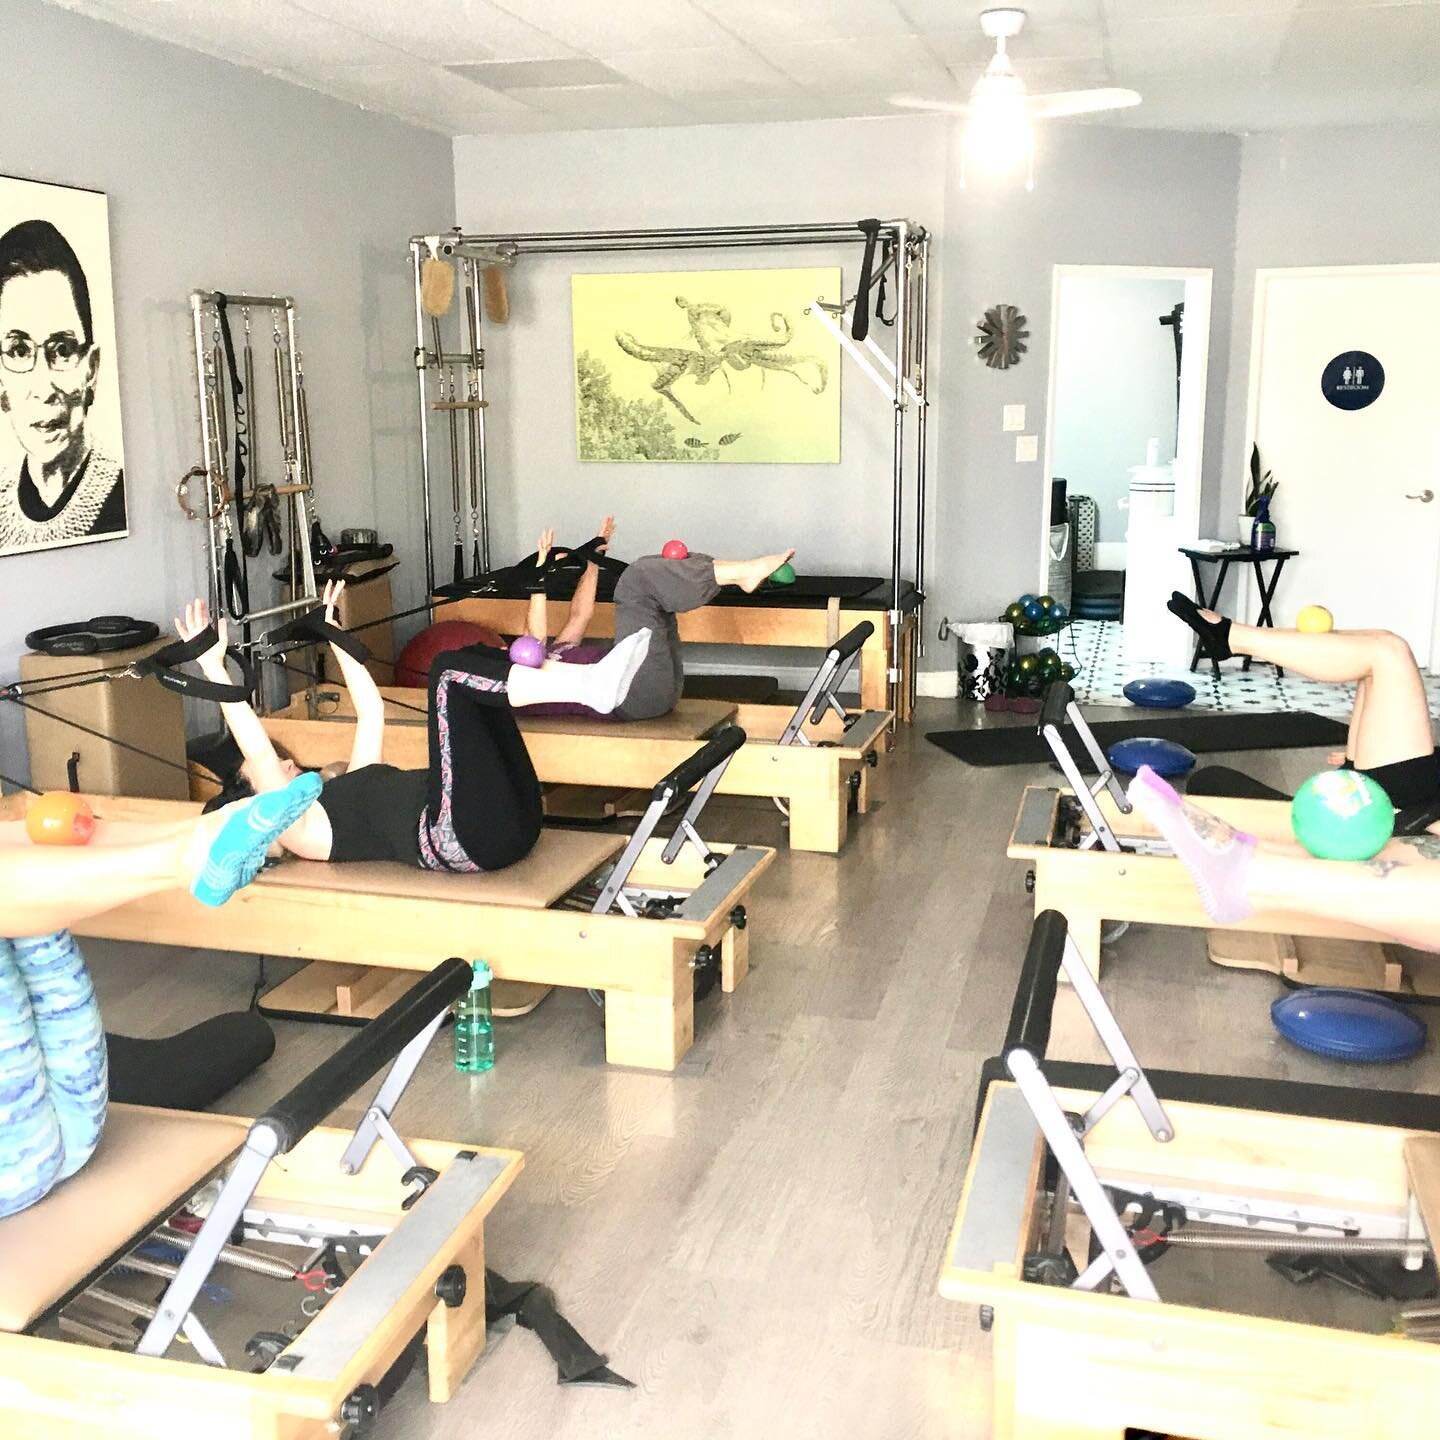 Intimate Pilates reformer classes with max 5 of students. Classes:  Mixed Level, Old Woman (or Gents) Springs Gentle Focused, Lunchtime Pilates, Intermediate/Advanced and Jack Rabbit Jumpboard. Intro specials available. Link for pricing and schedule 